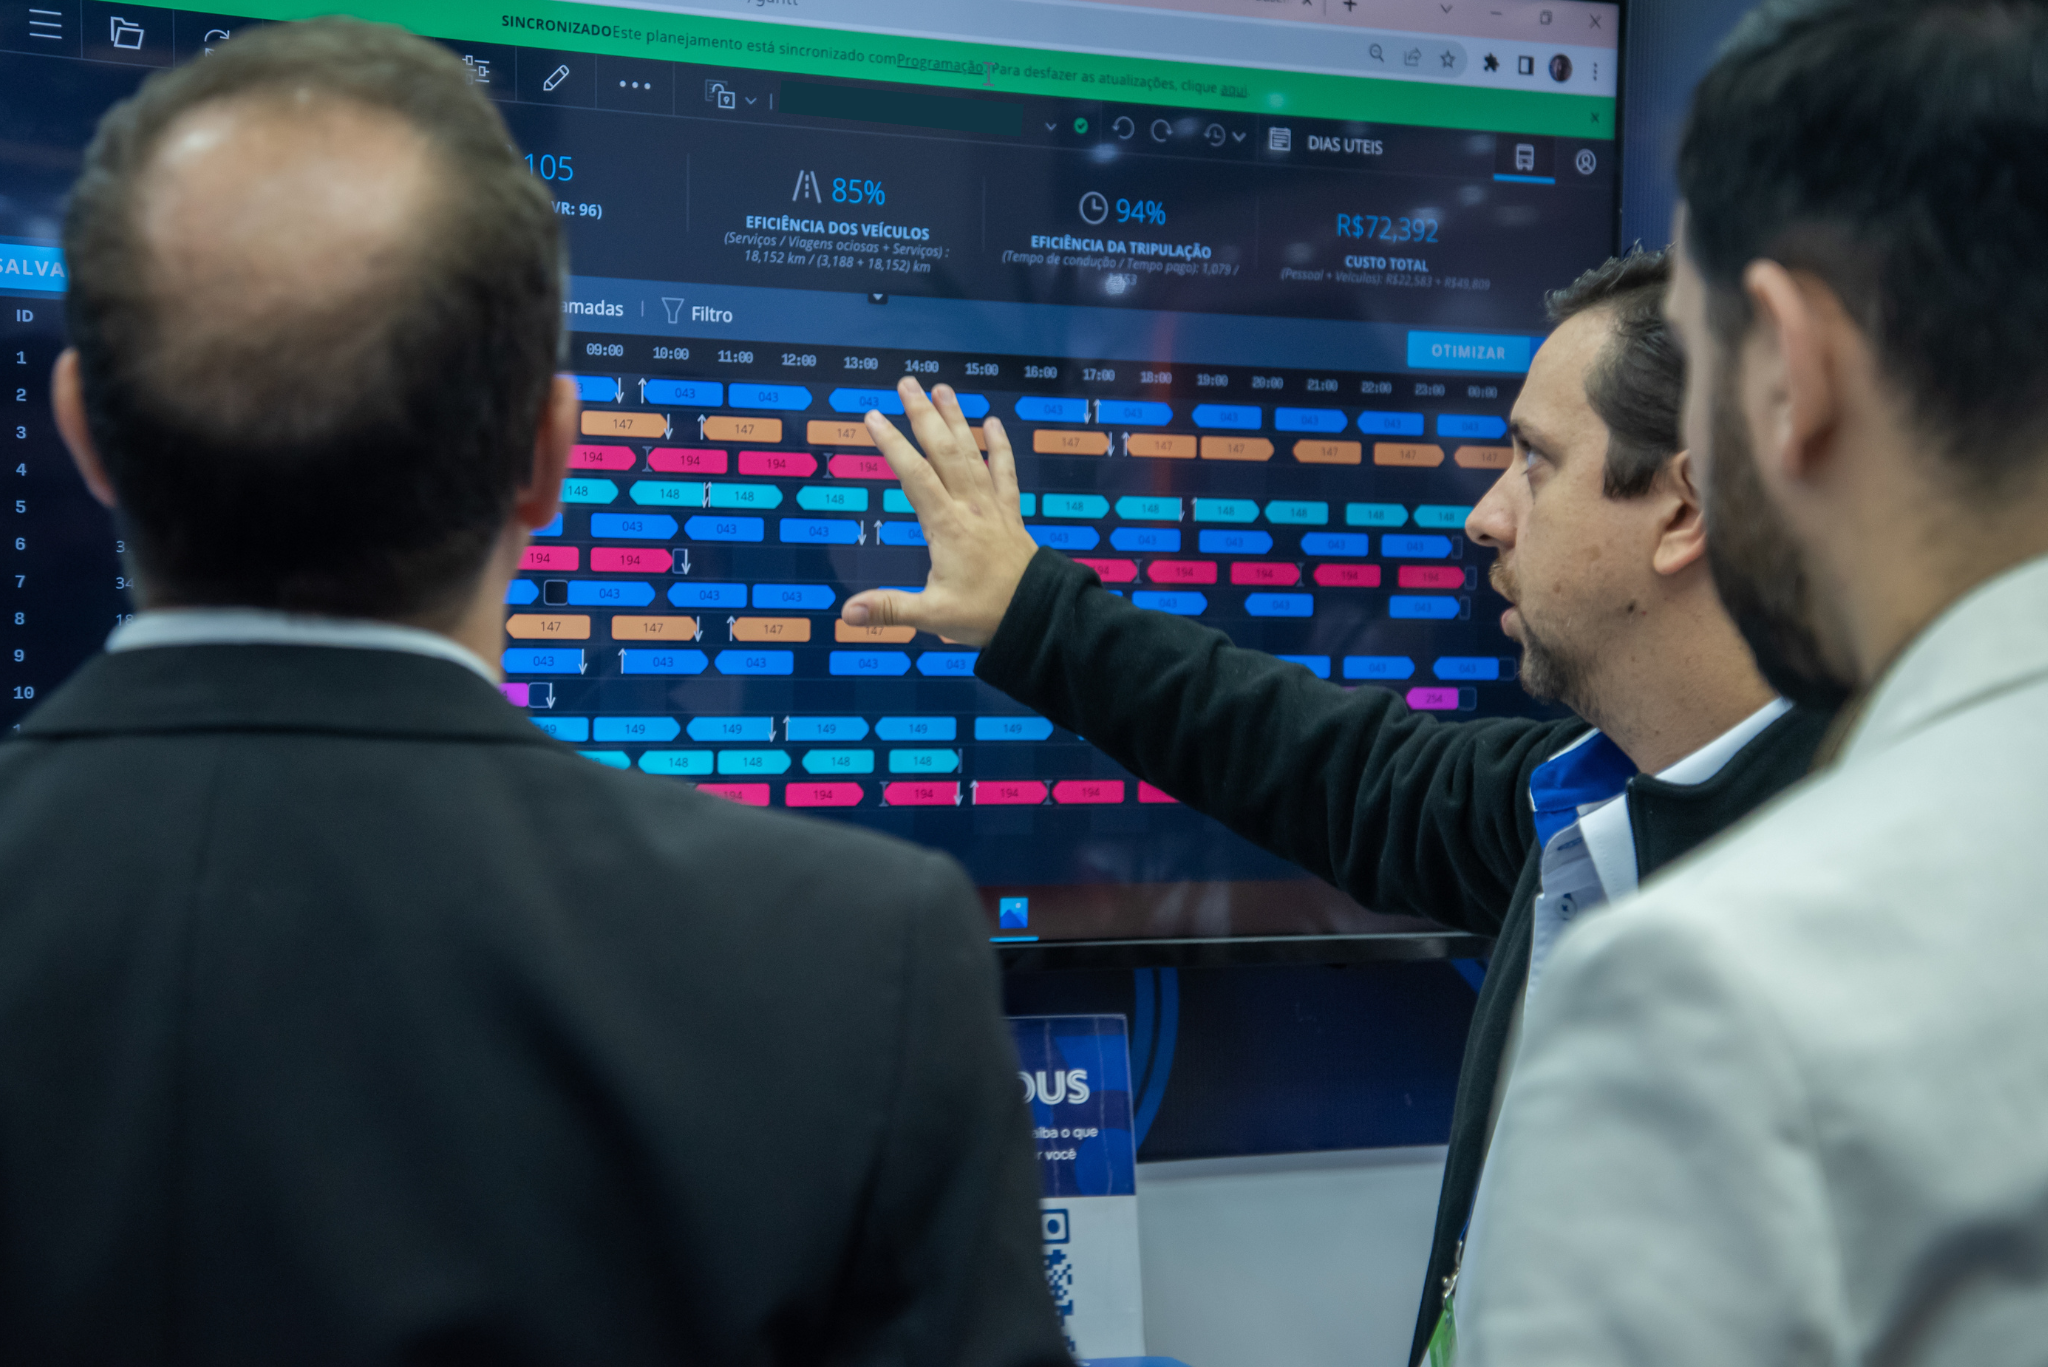  Optibus pre-sales engineer Pedro Martins demos the Optibus Planning product at the Lat.Bus conference in Brazil